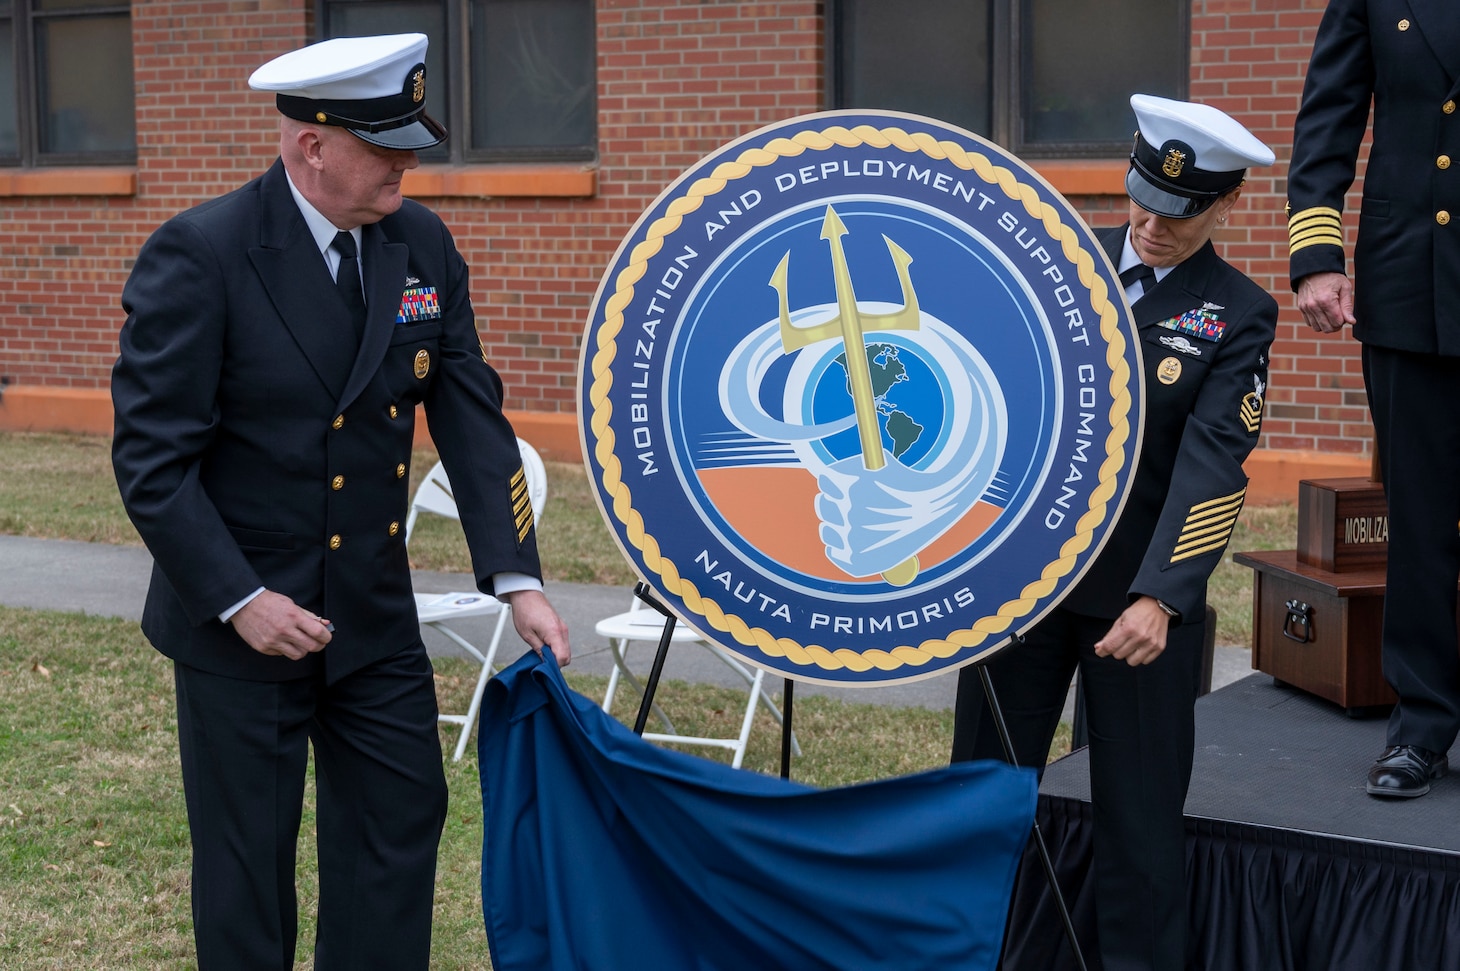 Command Master Chief Nicole Rios and Command Master Chief Michael Harvie unveil the seal for Mobilization and Deployment Support Command during the launch ceremony for Mobilization and Deployment Support Command.